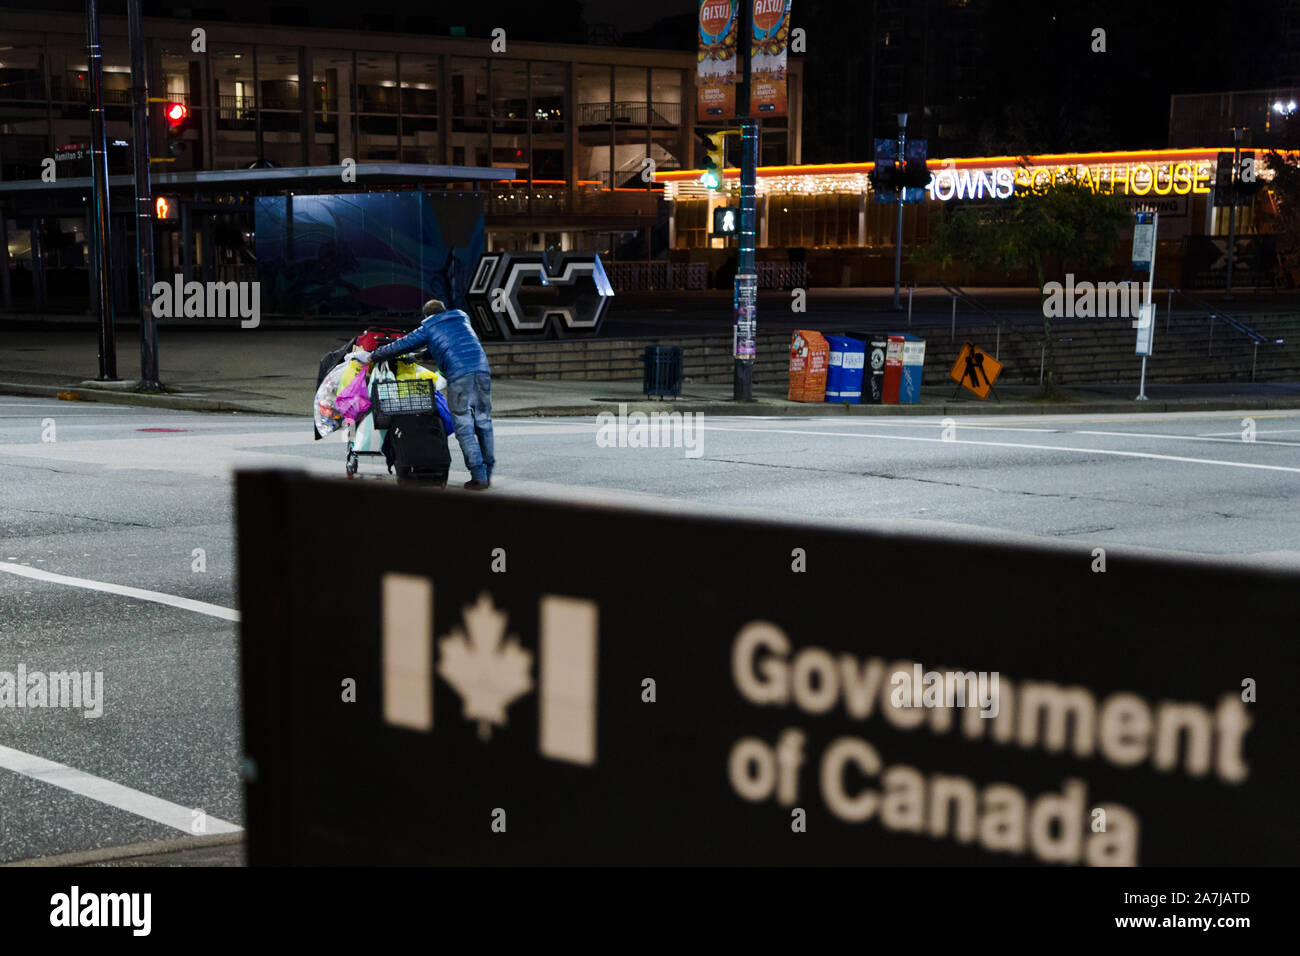 VANCOUVER, BC, CANADA - OCT 05, 2019: A homeless man with a shopping cart as the subject of focus passing by a Government of Canada, out of focus Stock Photo